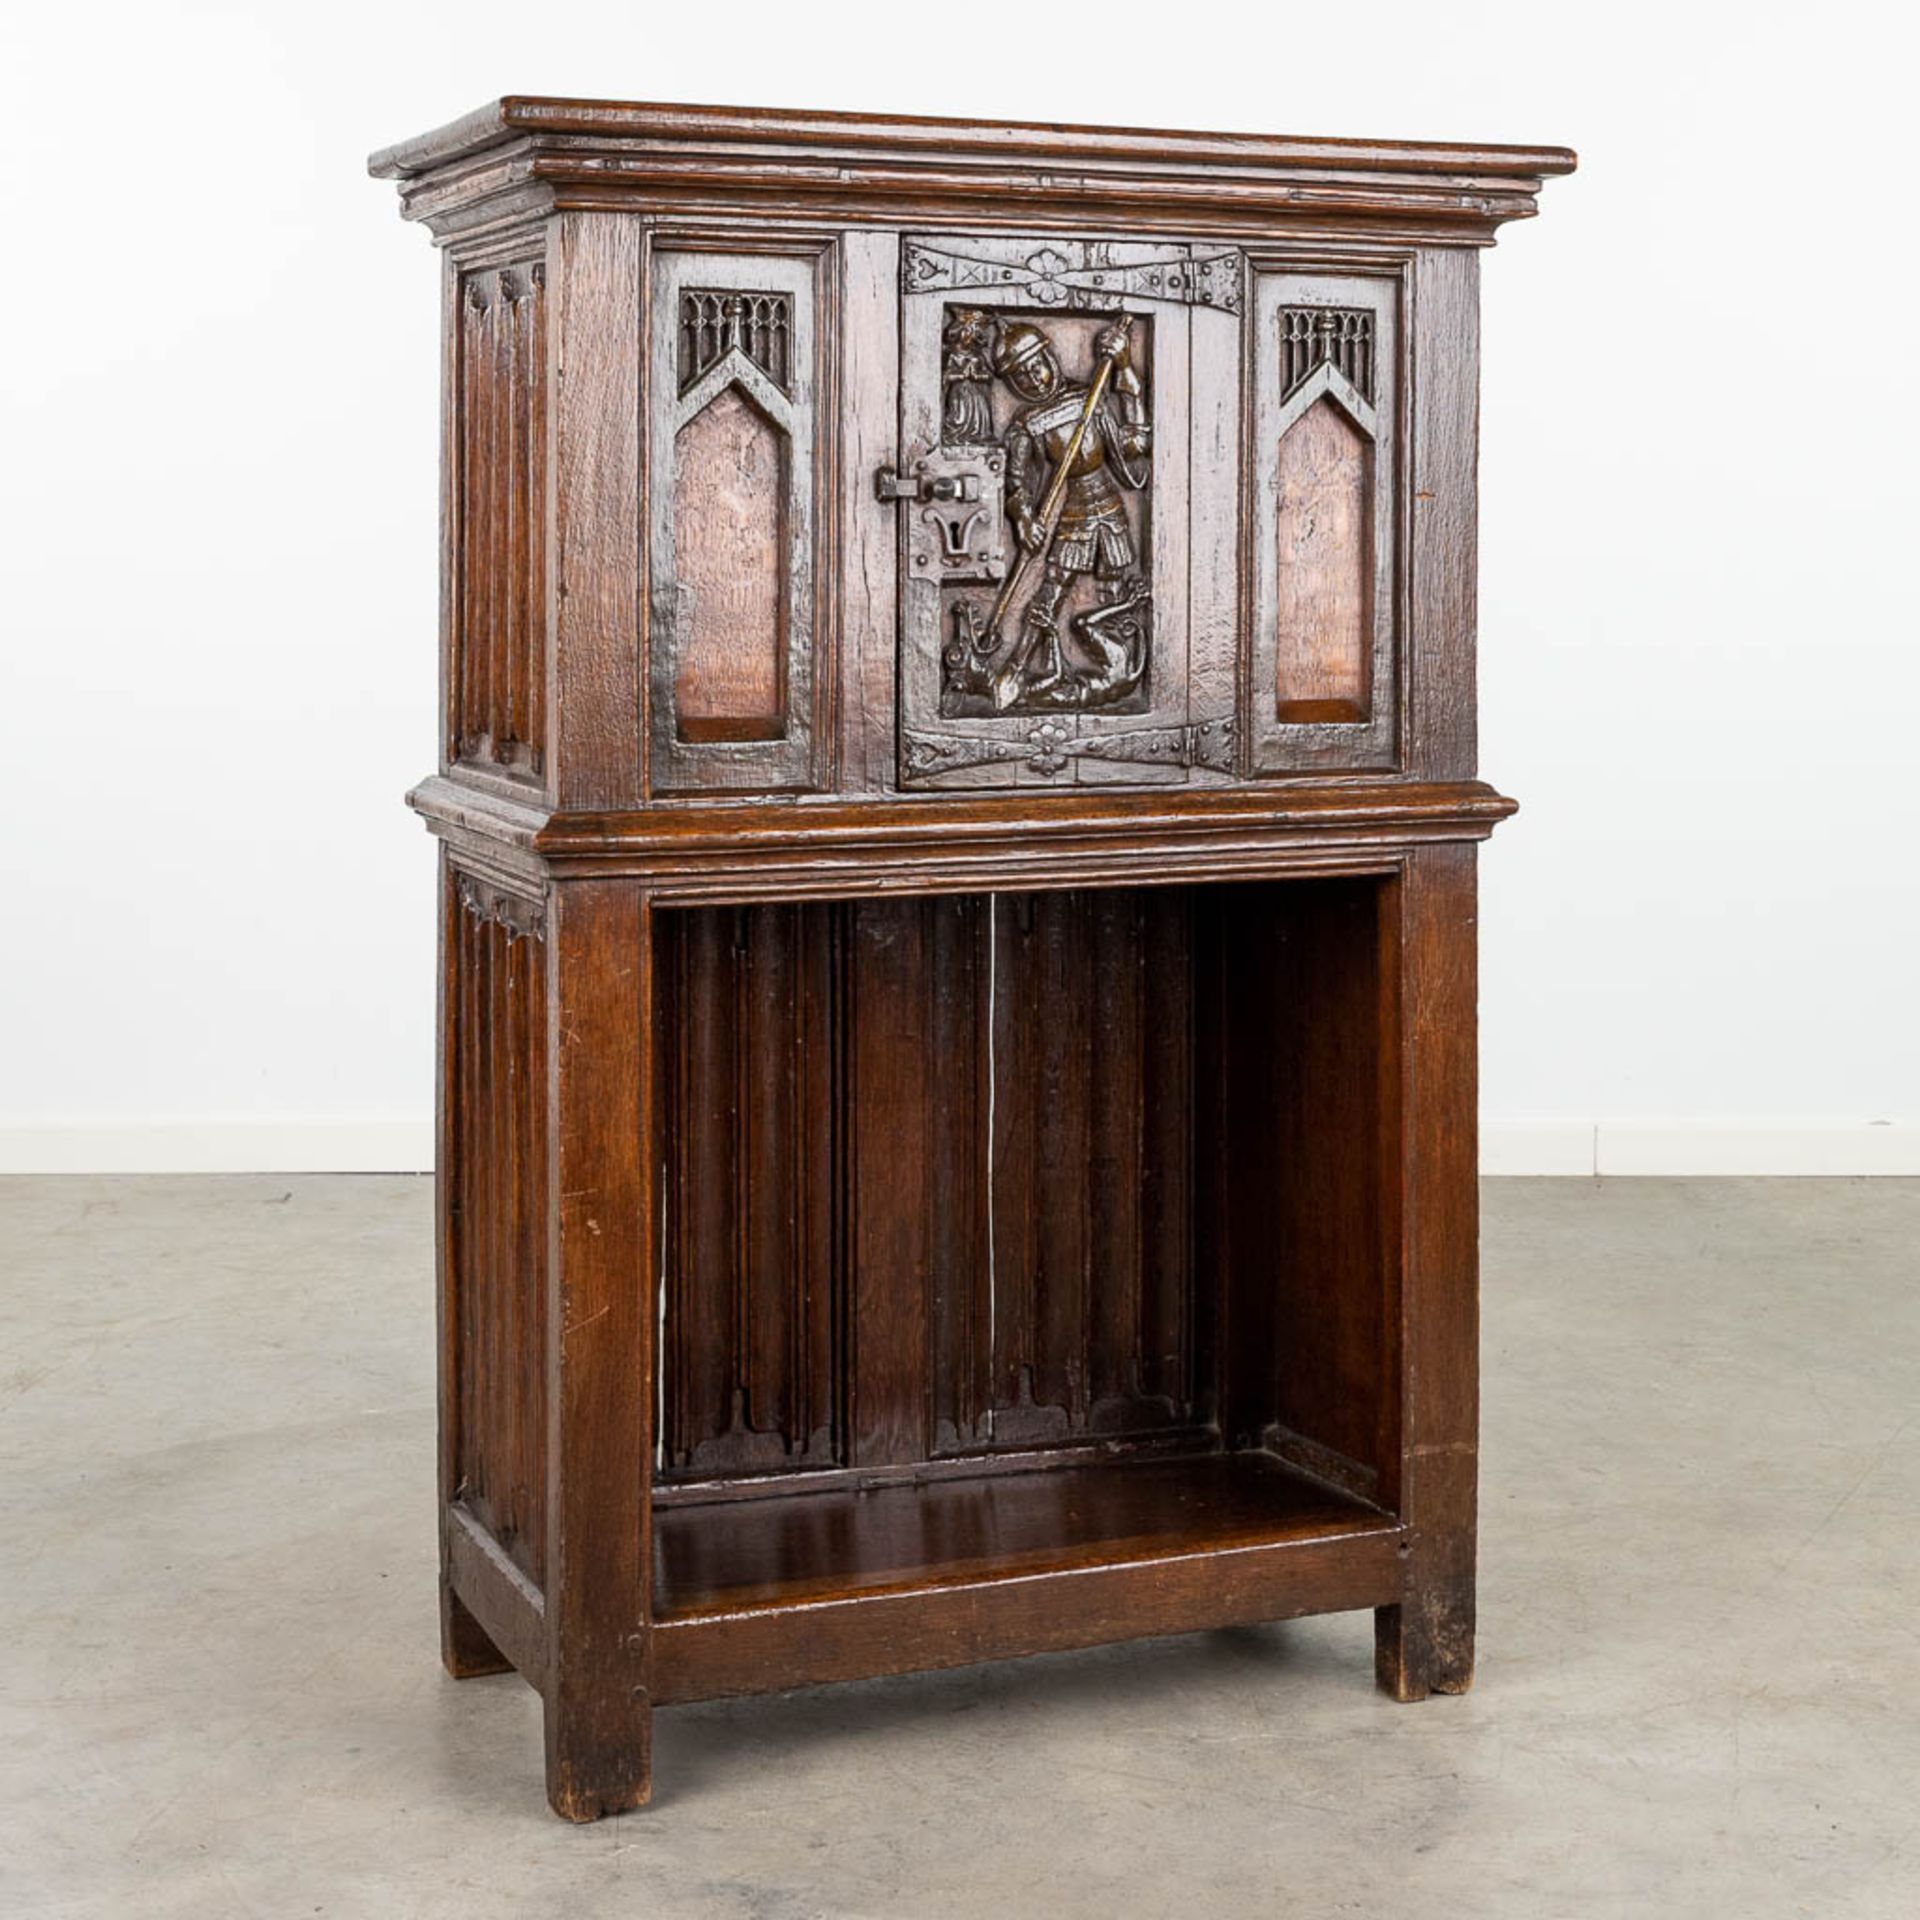 An antique cabinet made in Flemish Renaissance style. Late 17th early 18th C. (L:40 x W:83 x H:118